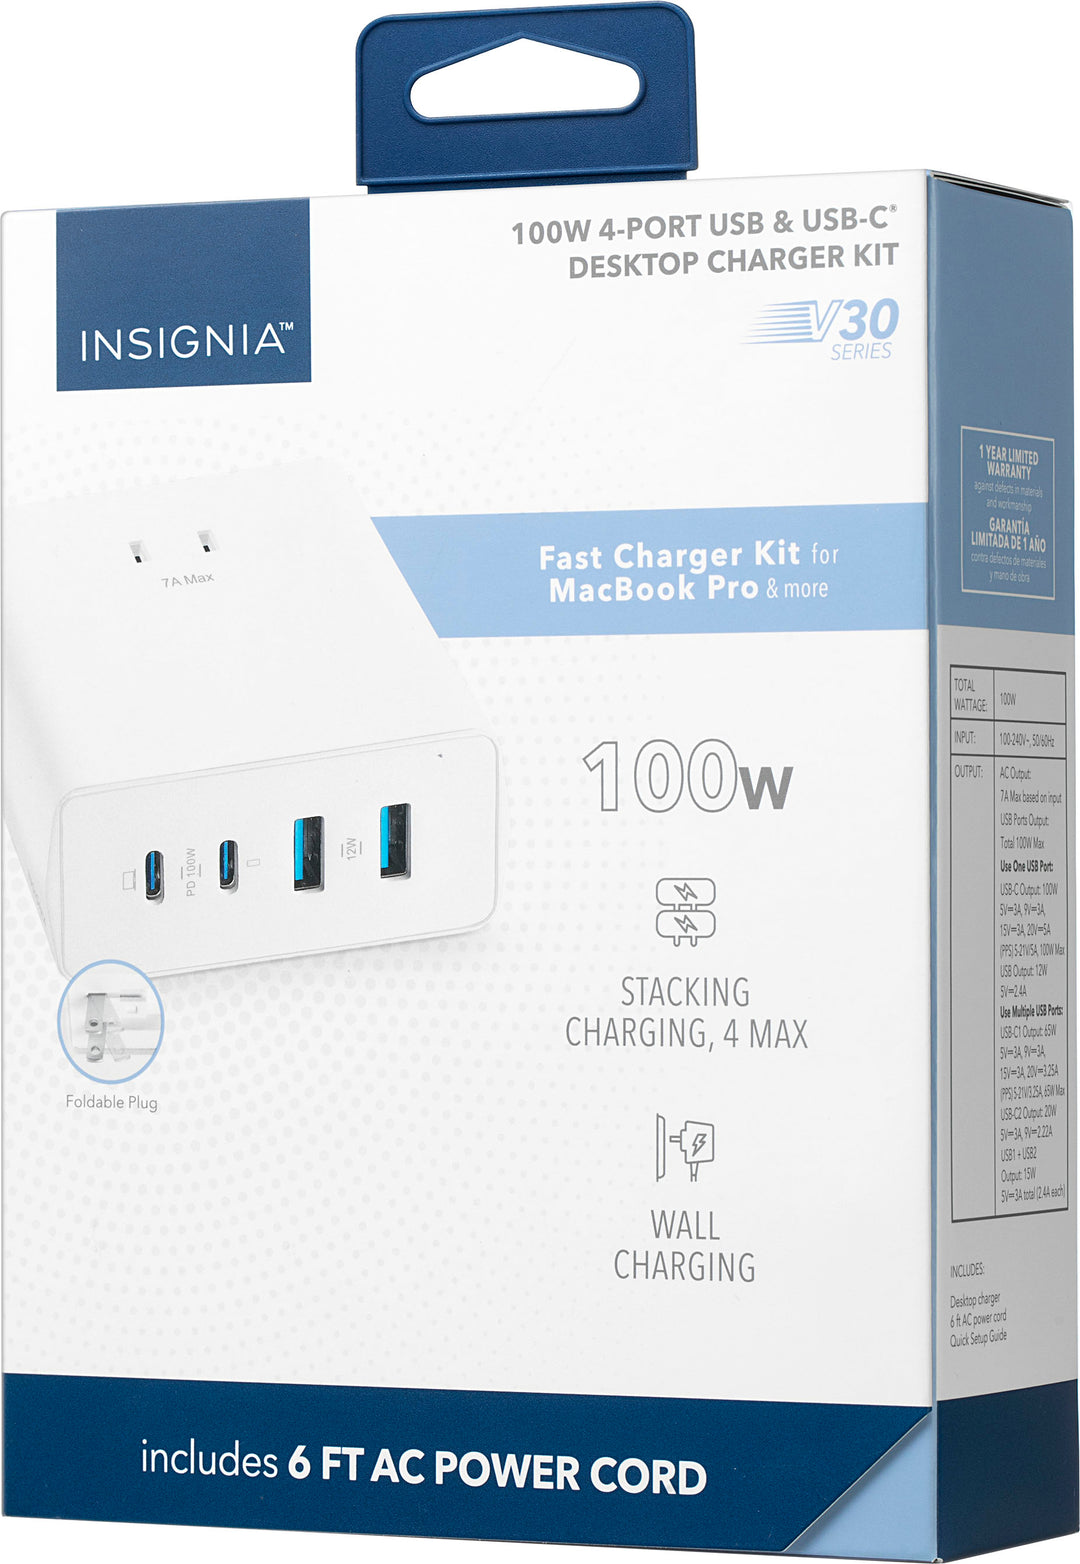 Insignia™ - 100W 4-Port USB and USB-C Desktop Charger Kit for MacBook Pro, Smartphone, Tablet and More - White_8